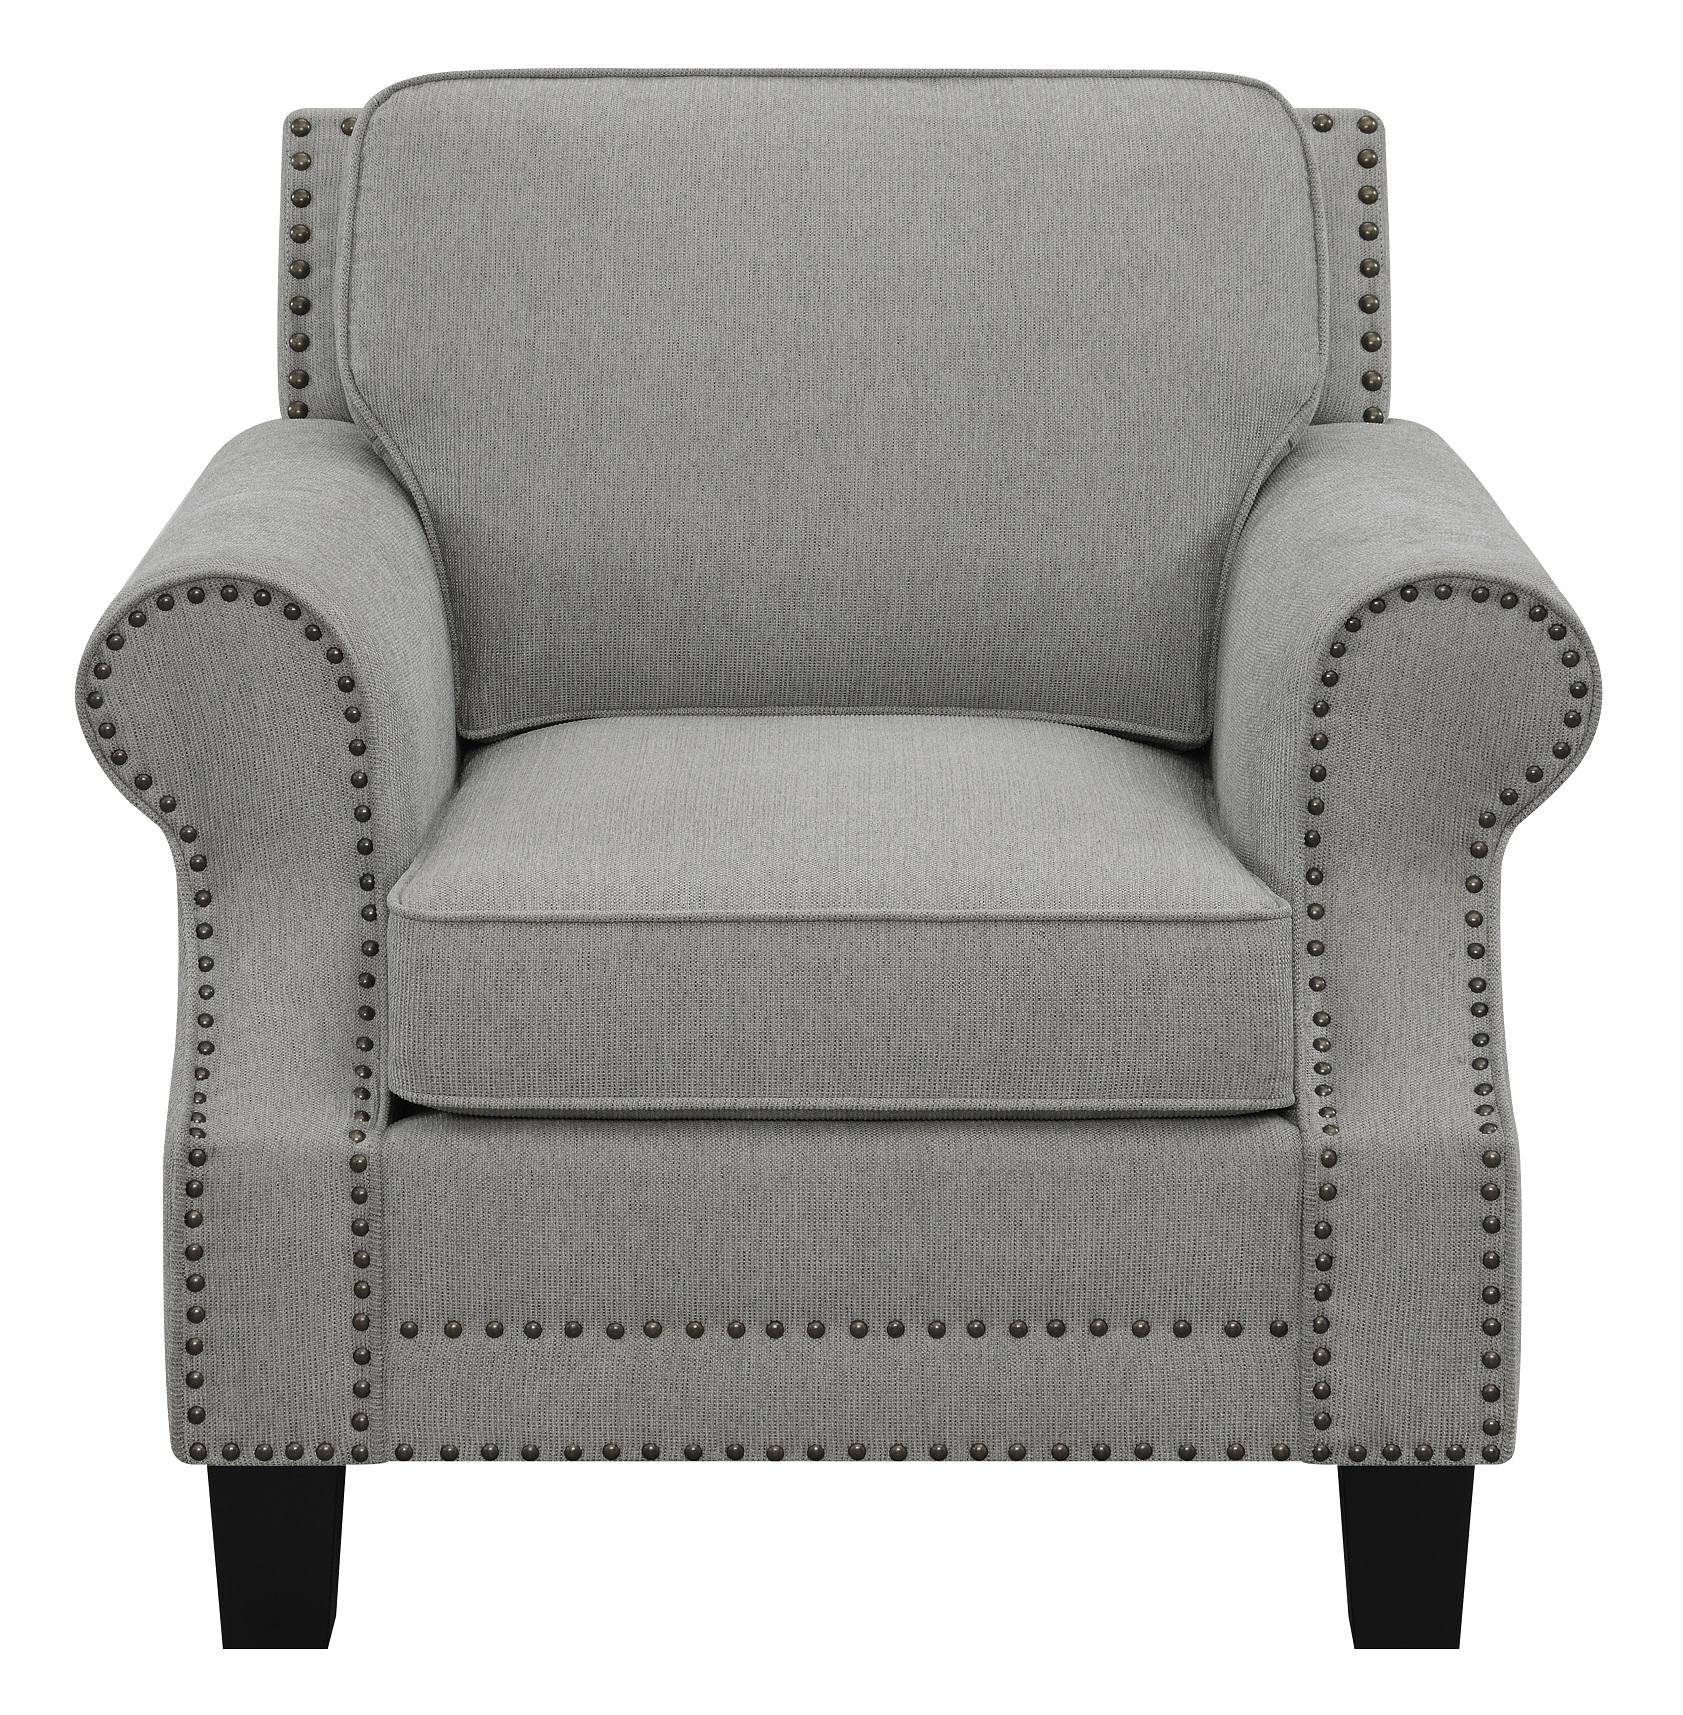 Transitional Arm Chair 506873 Sheldon 506873 in Gray 